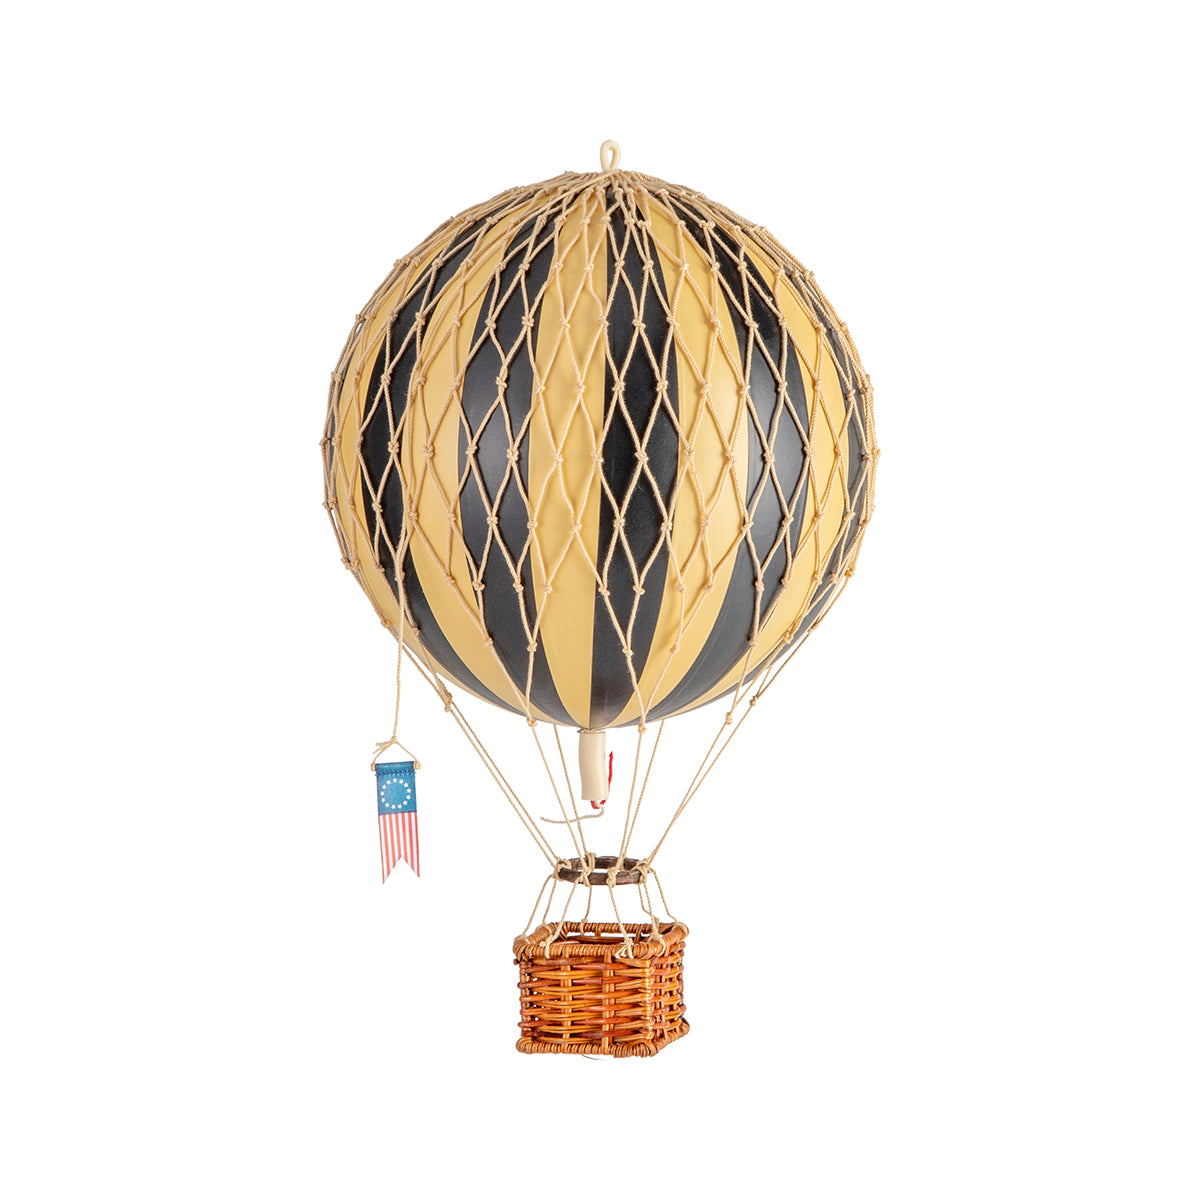 A Wonderen Small Hot Air Balloon - Travels Light with a wicker basket is quirky.